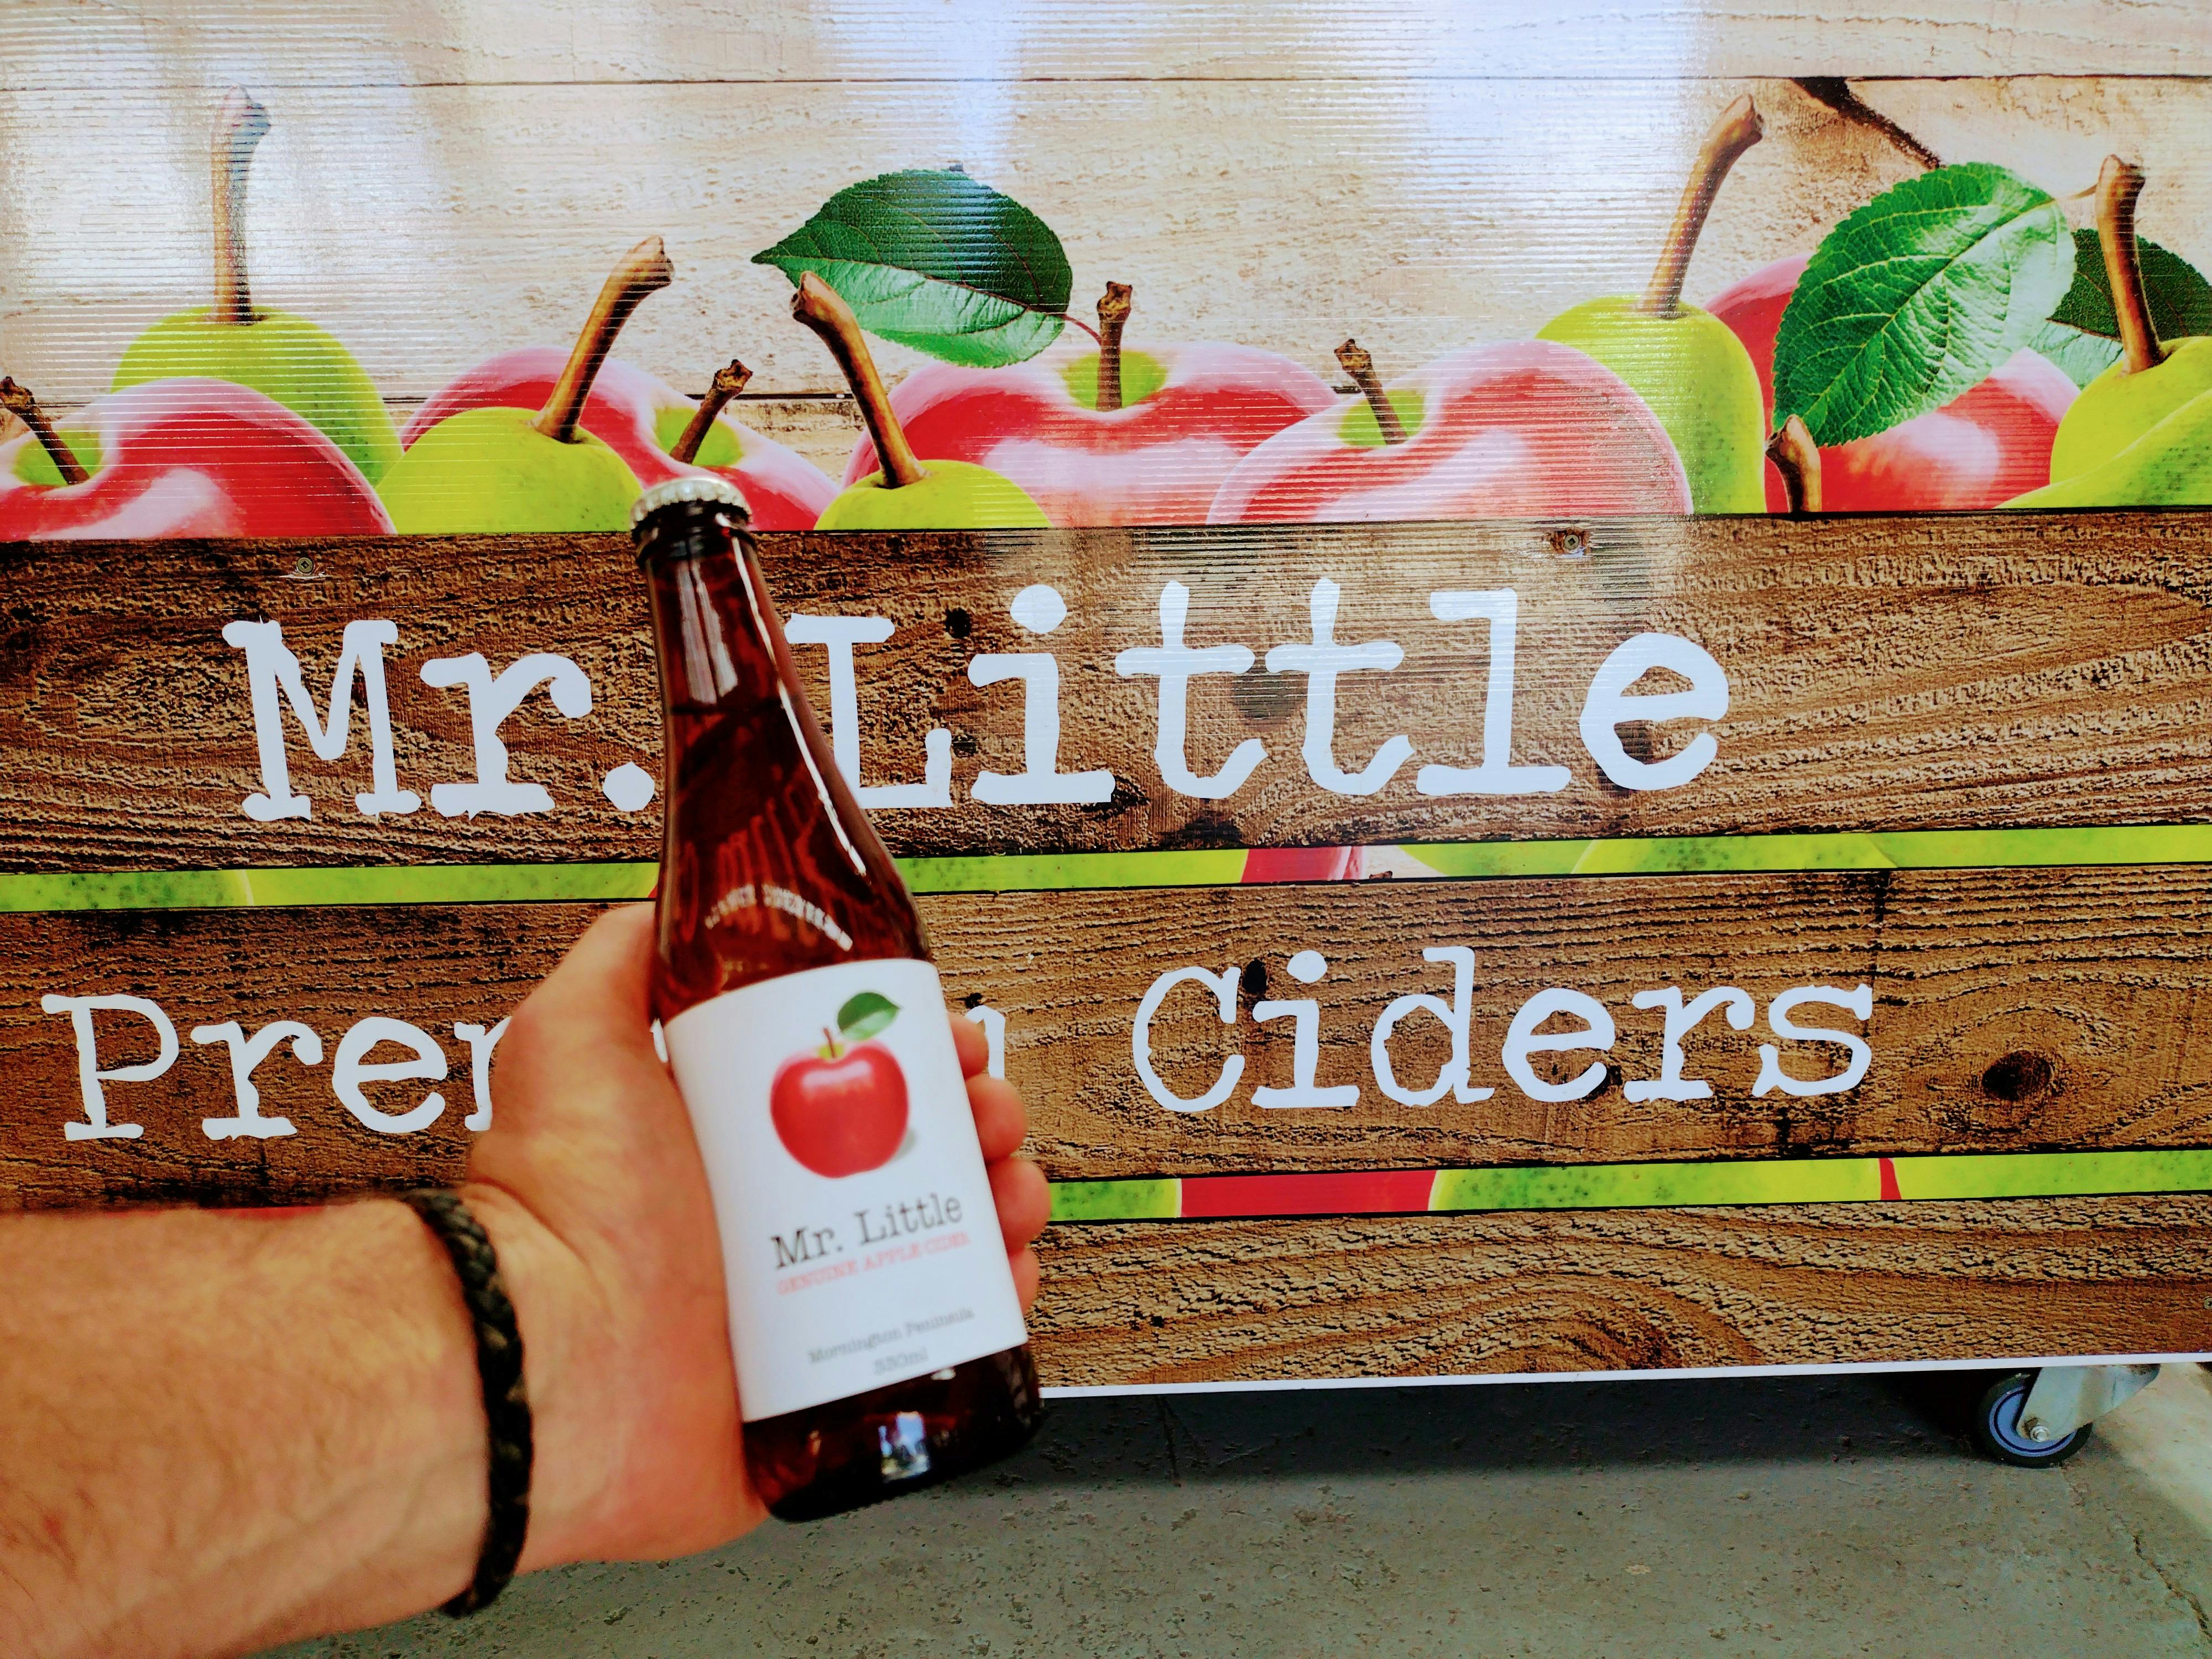 Mr Little and Peninsula Cider